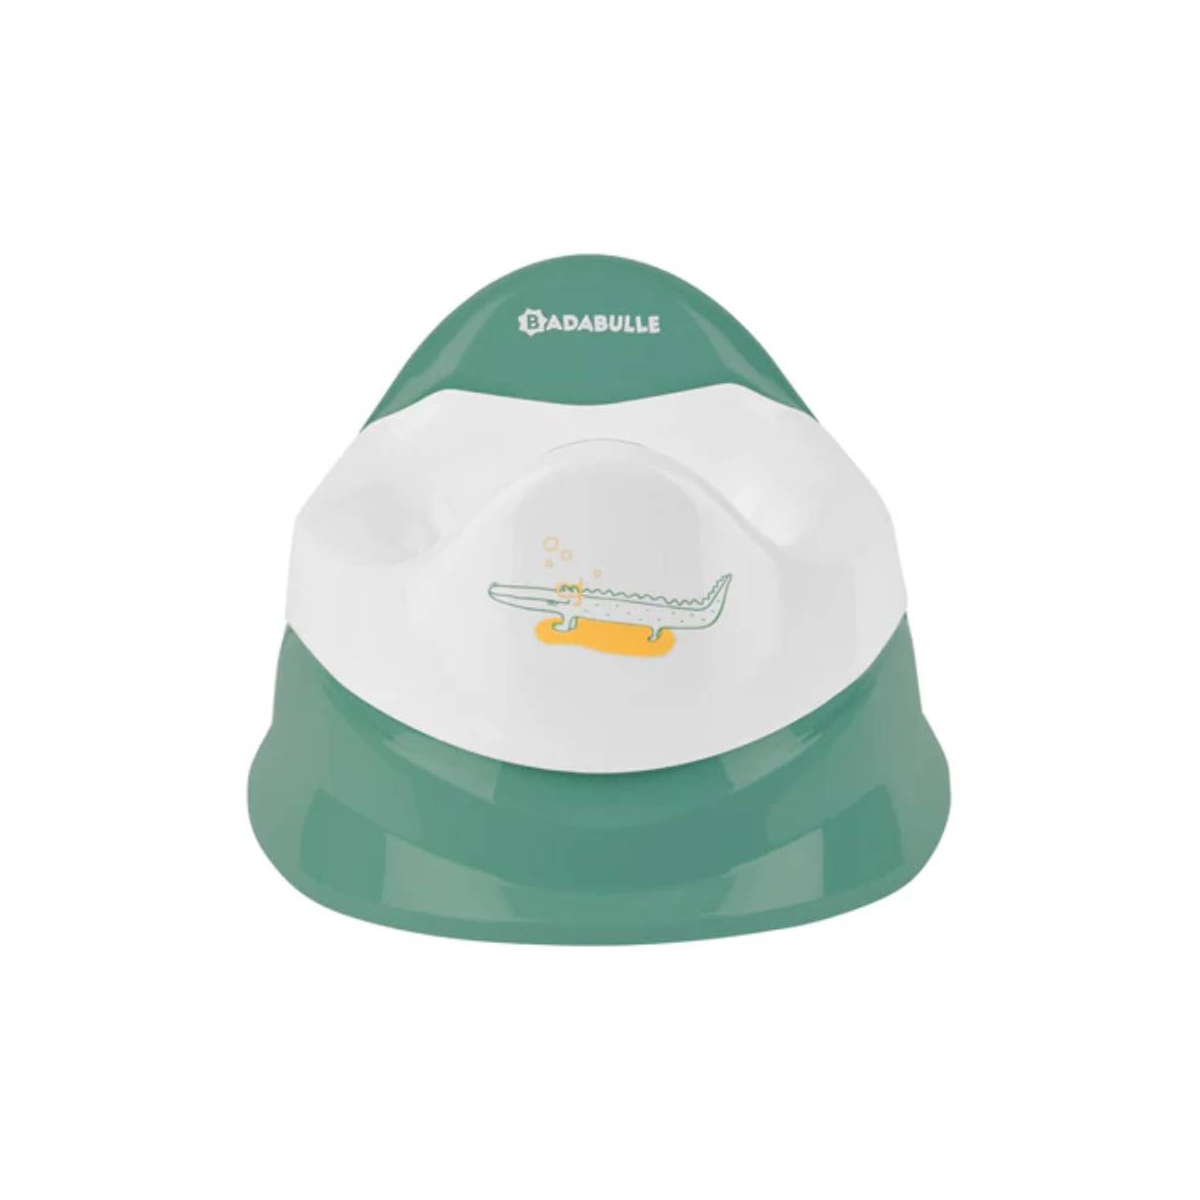 Badabulle Learning Potty with Removable Bowl